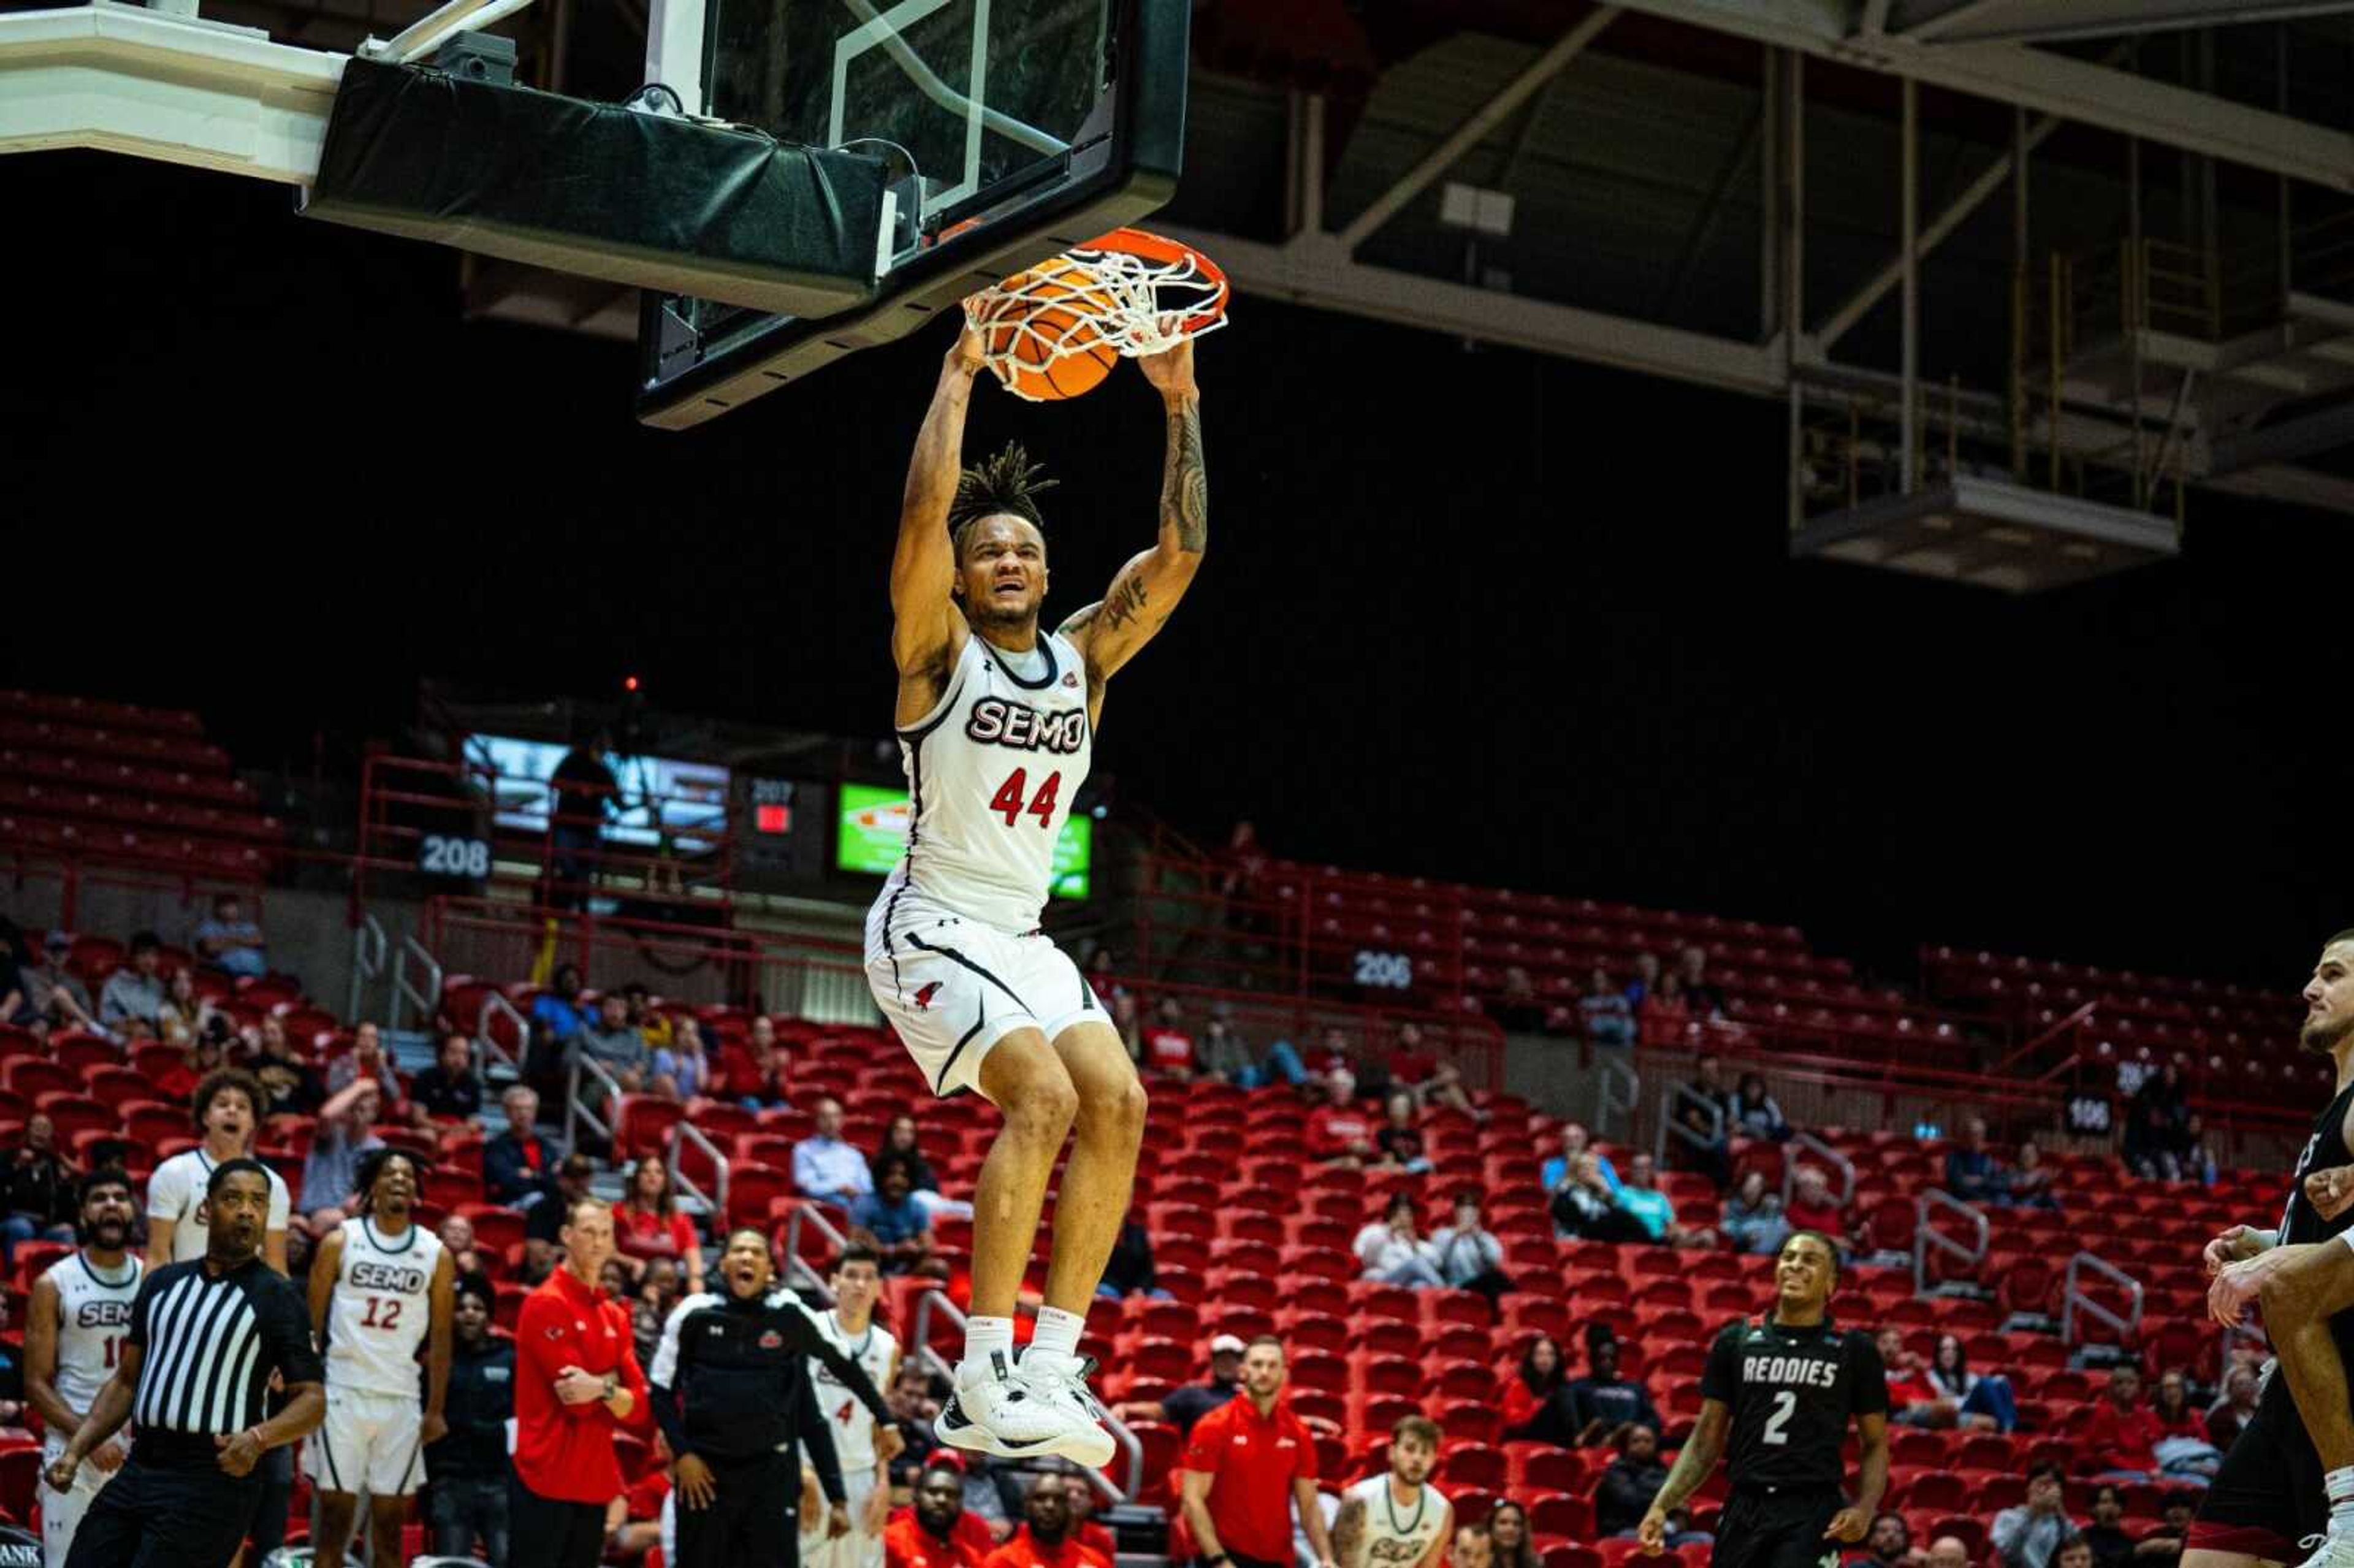 Stacker and Martin to have an immediate impact on SEMO basketball